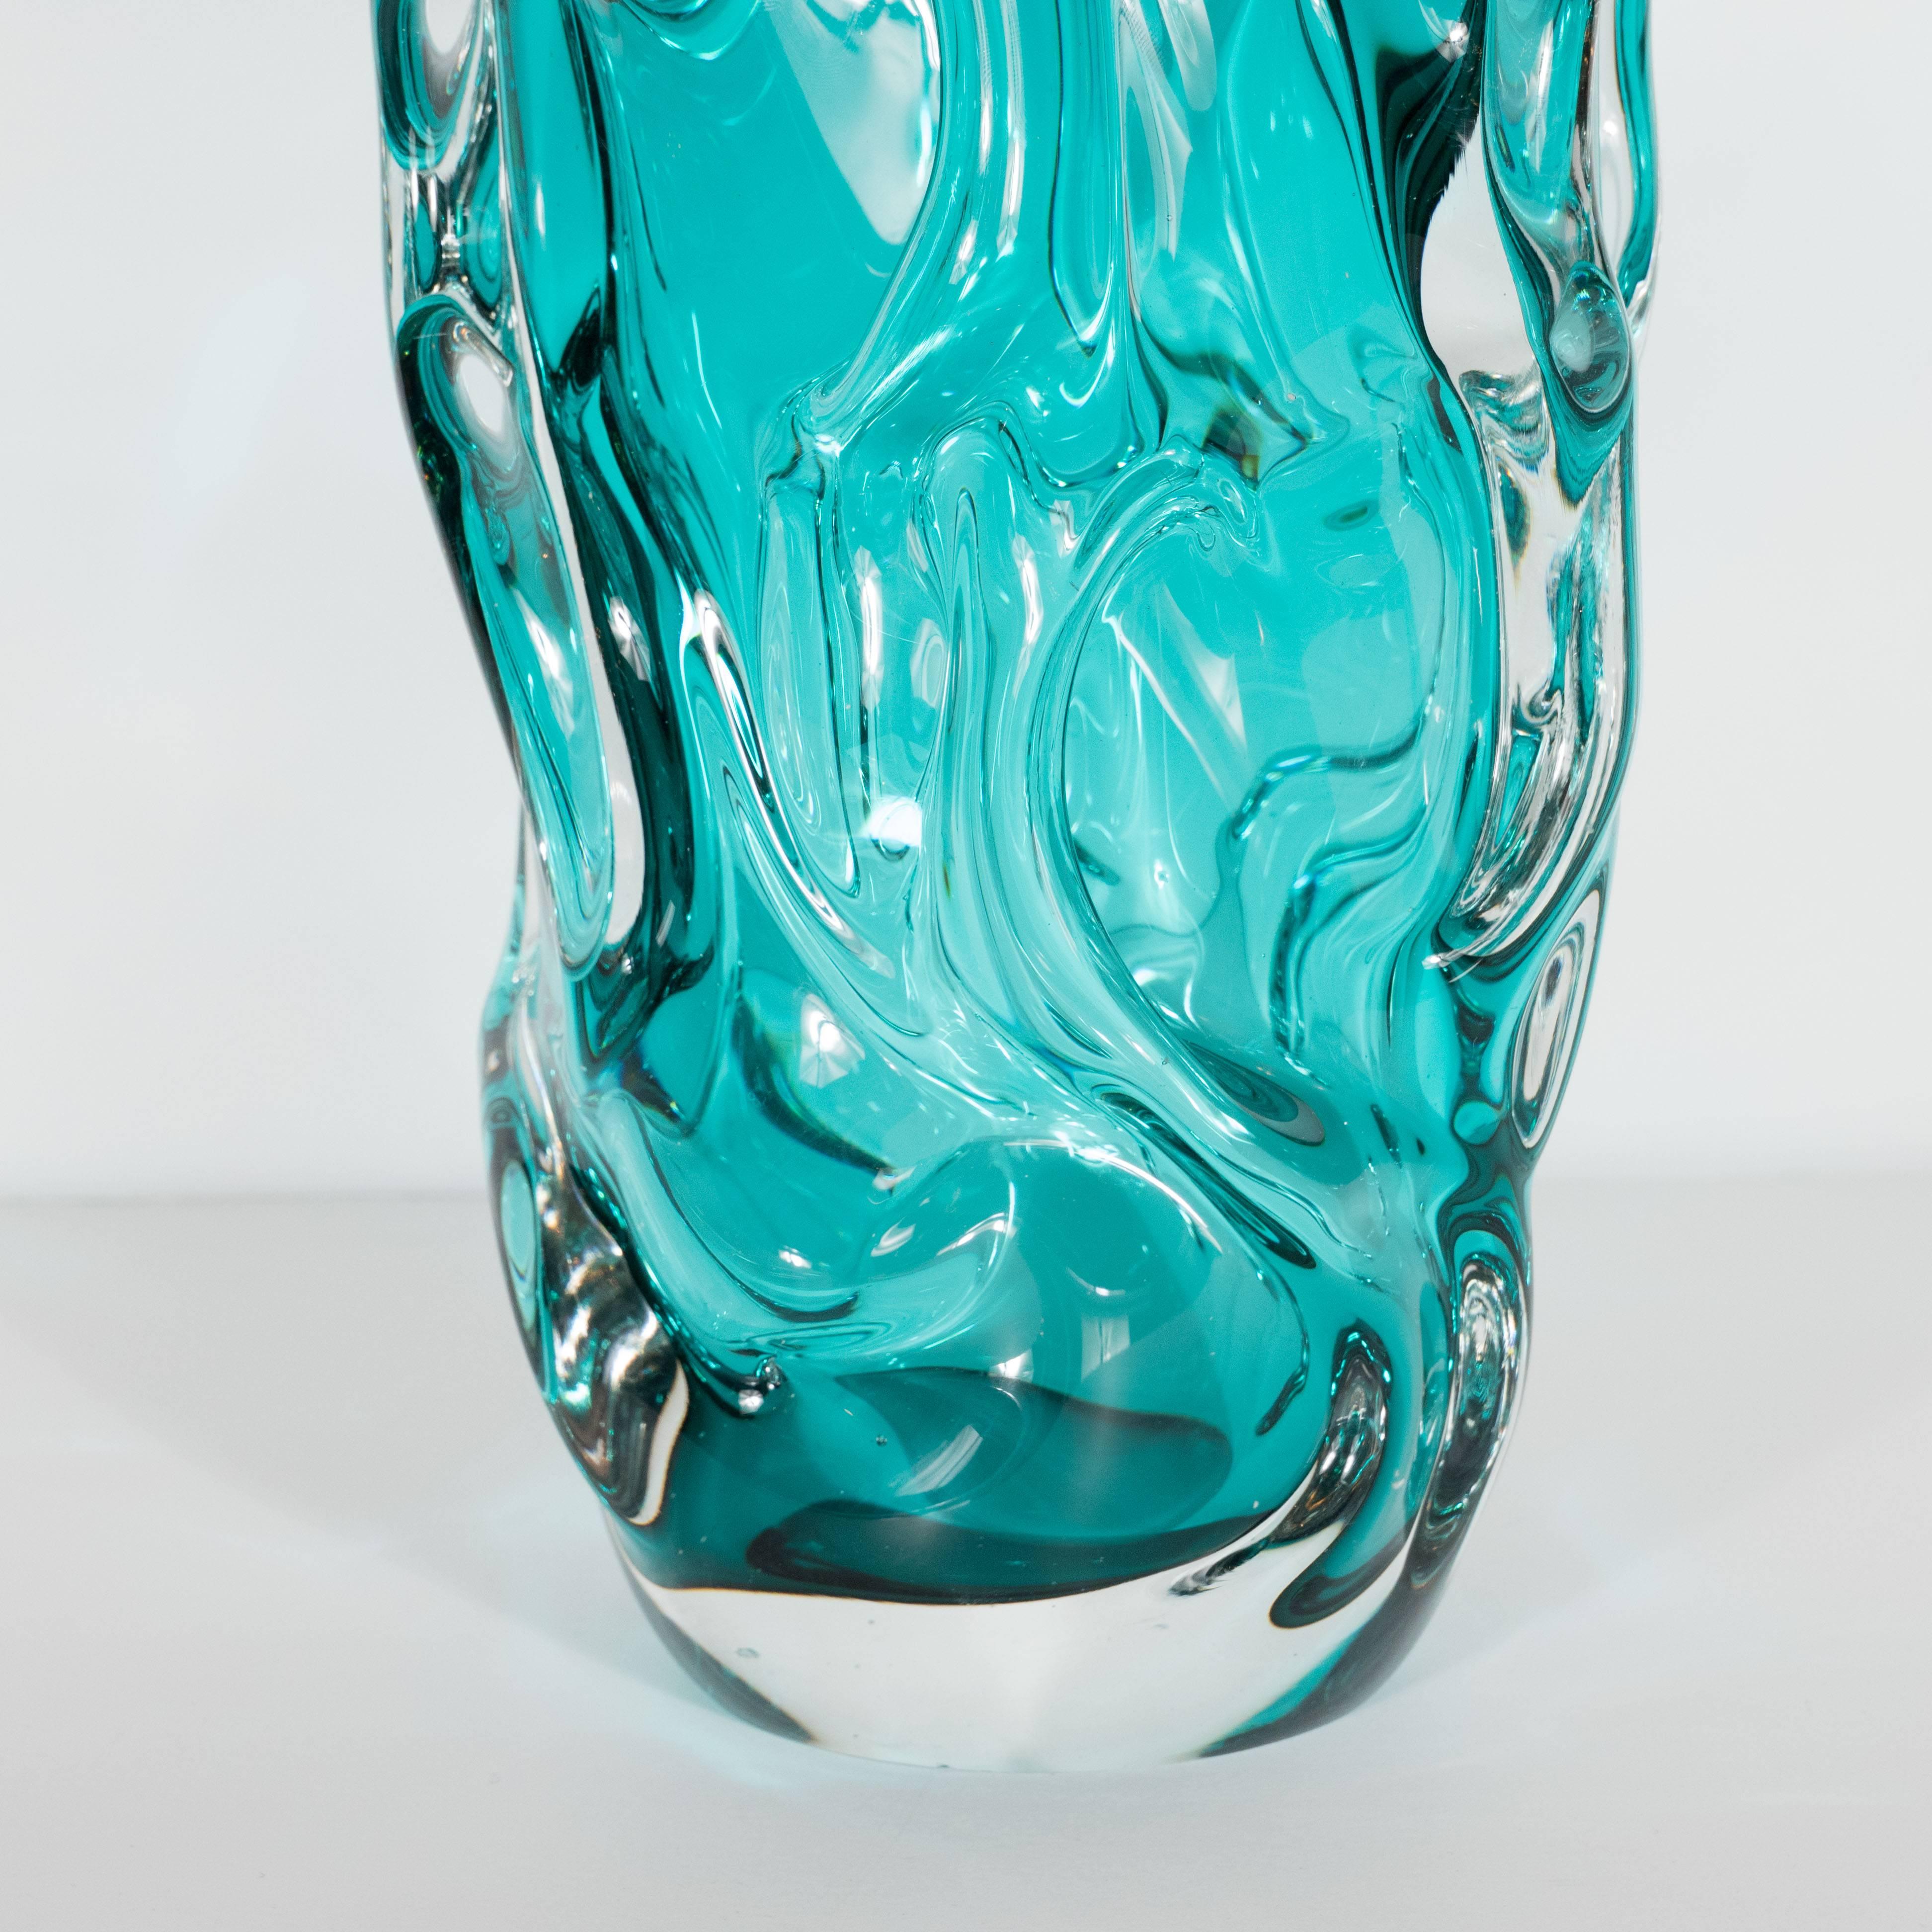 Mid-20th Century Midcentury Sculptural Handblown Murano Vase in Translucent and Teal Glass